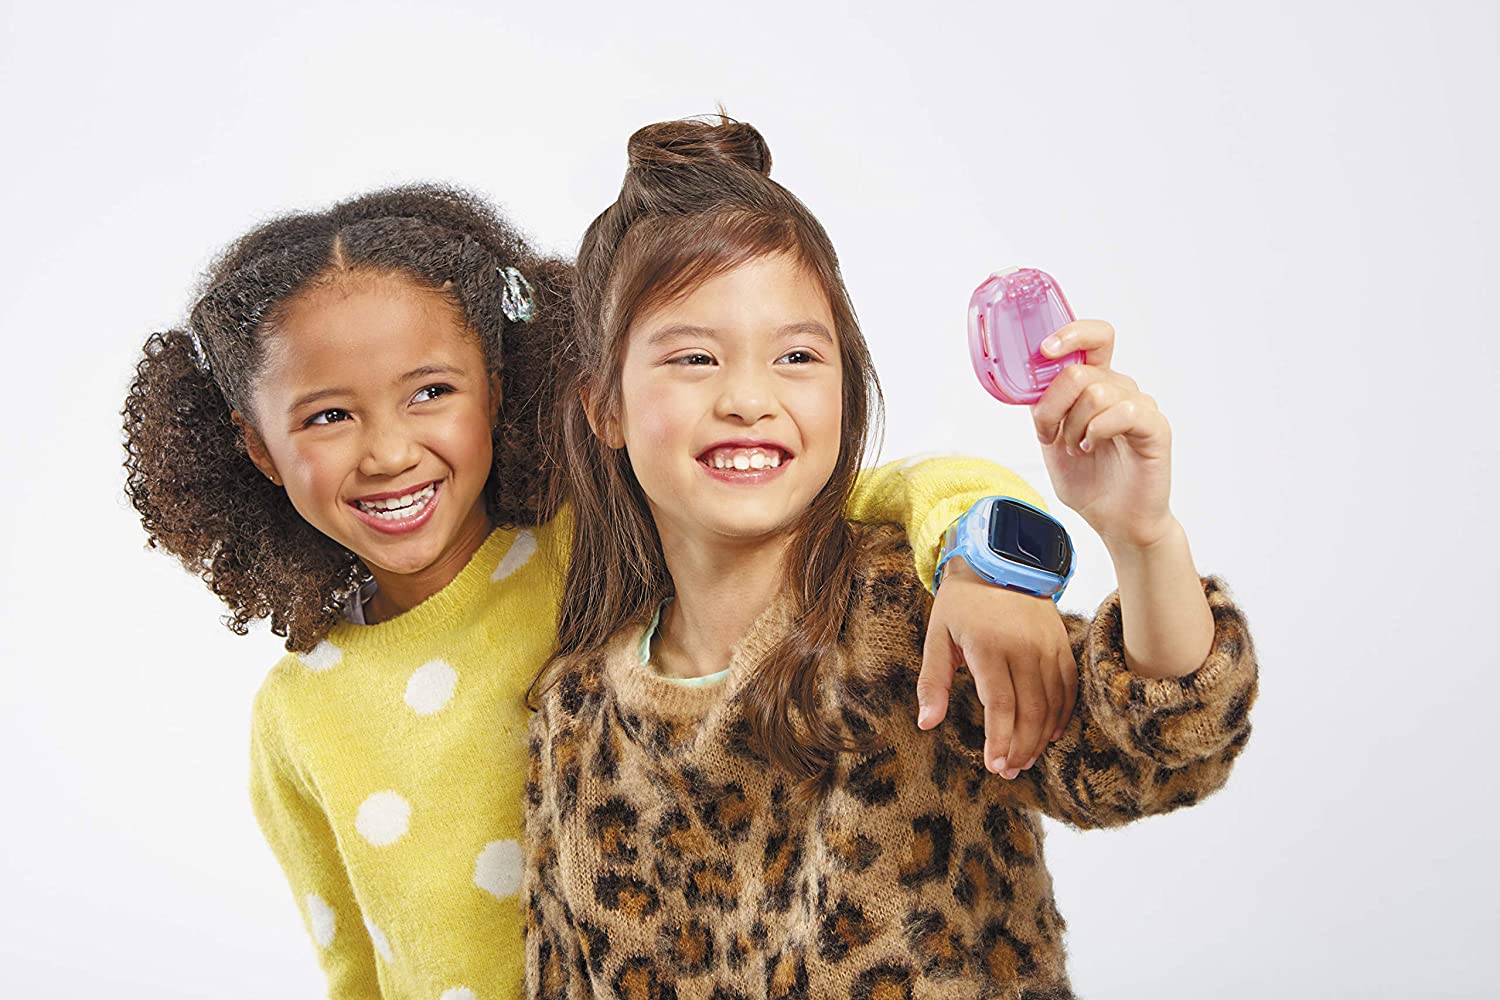 PRODUCT REVIEW: KEEPING THE KIDS ENTERTAINED WITH SMIGGLE